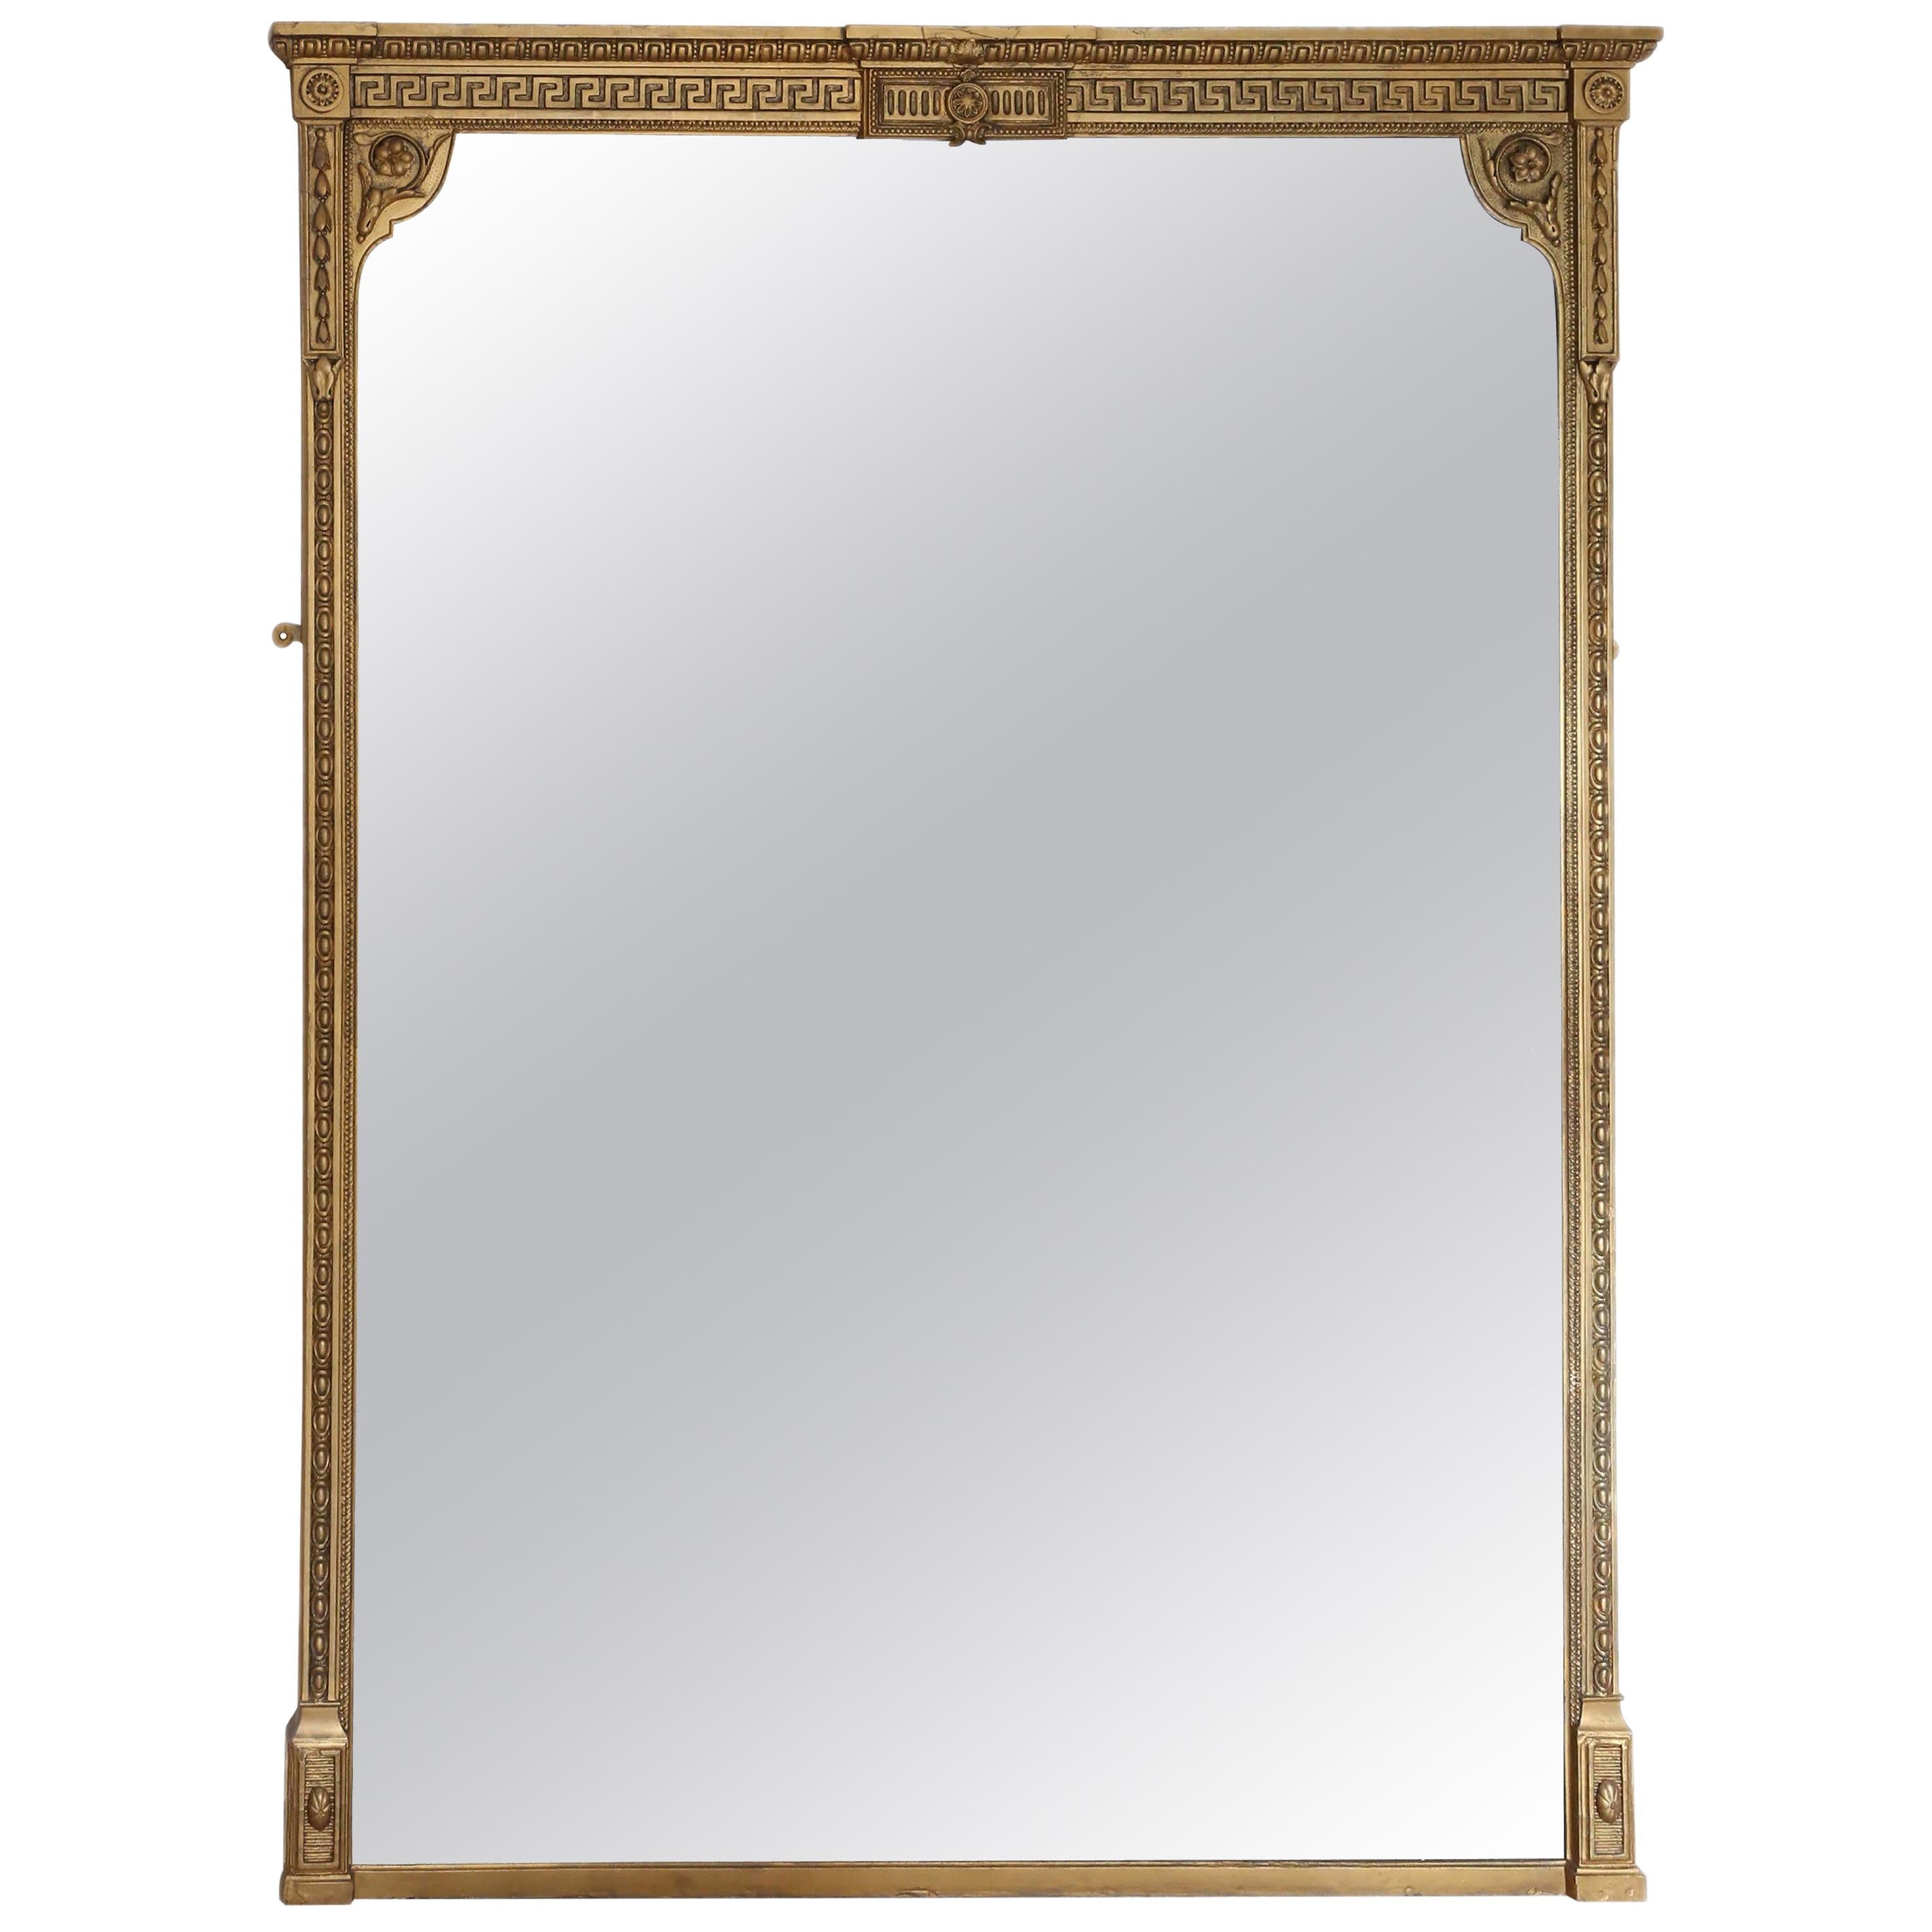 Antique Very Large Quality Gilt Overmantle Wall Mirror, 19th Century